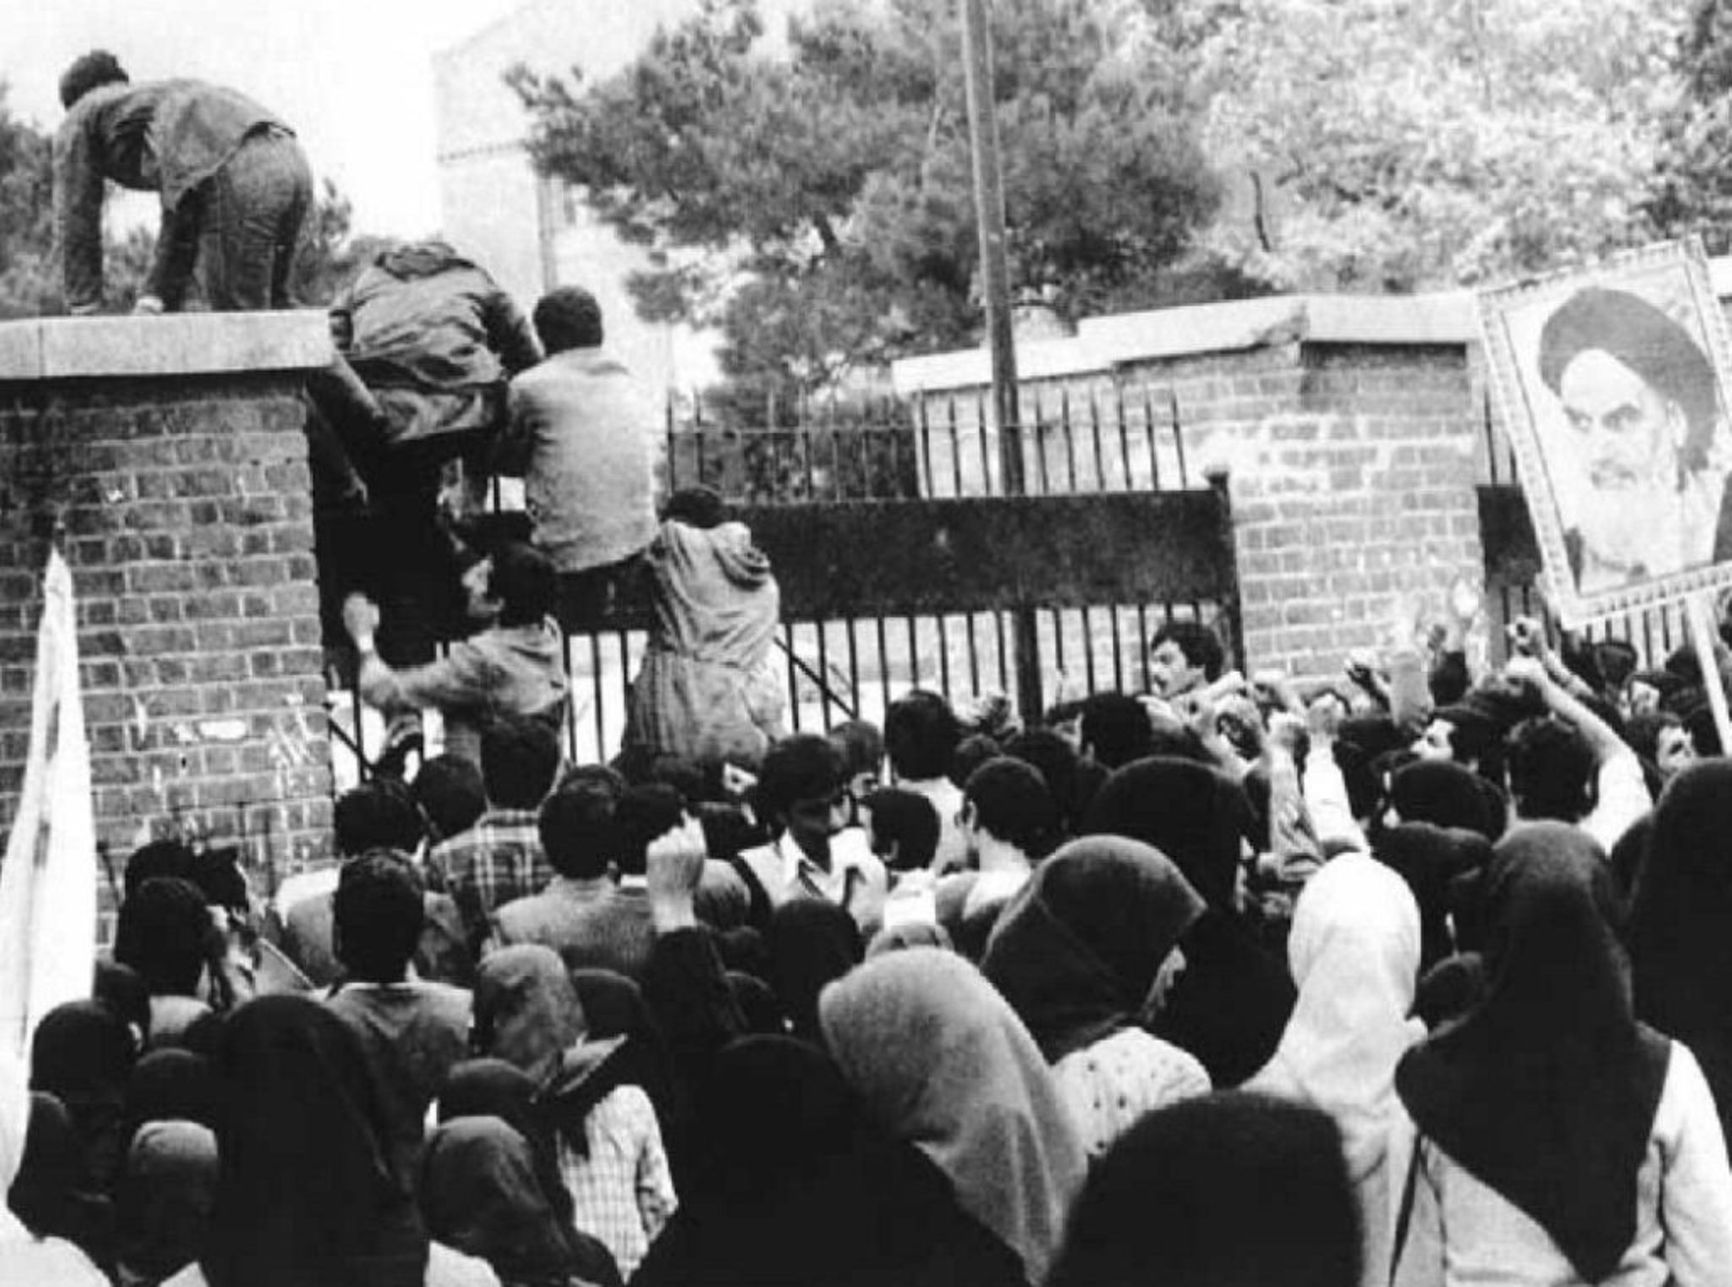 Seizure of the U.S. Embassy in Tehran by supporters of Ruhollah Khomeini, November 4, 1979